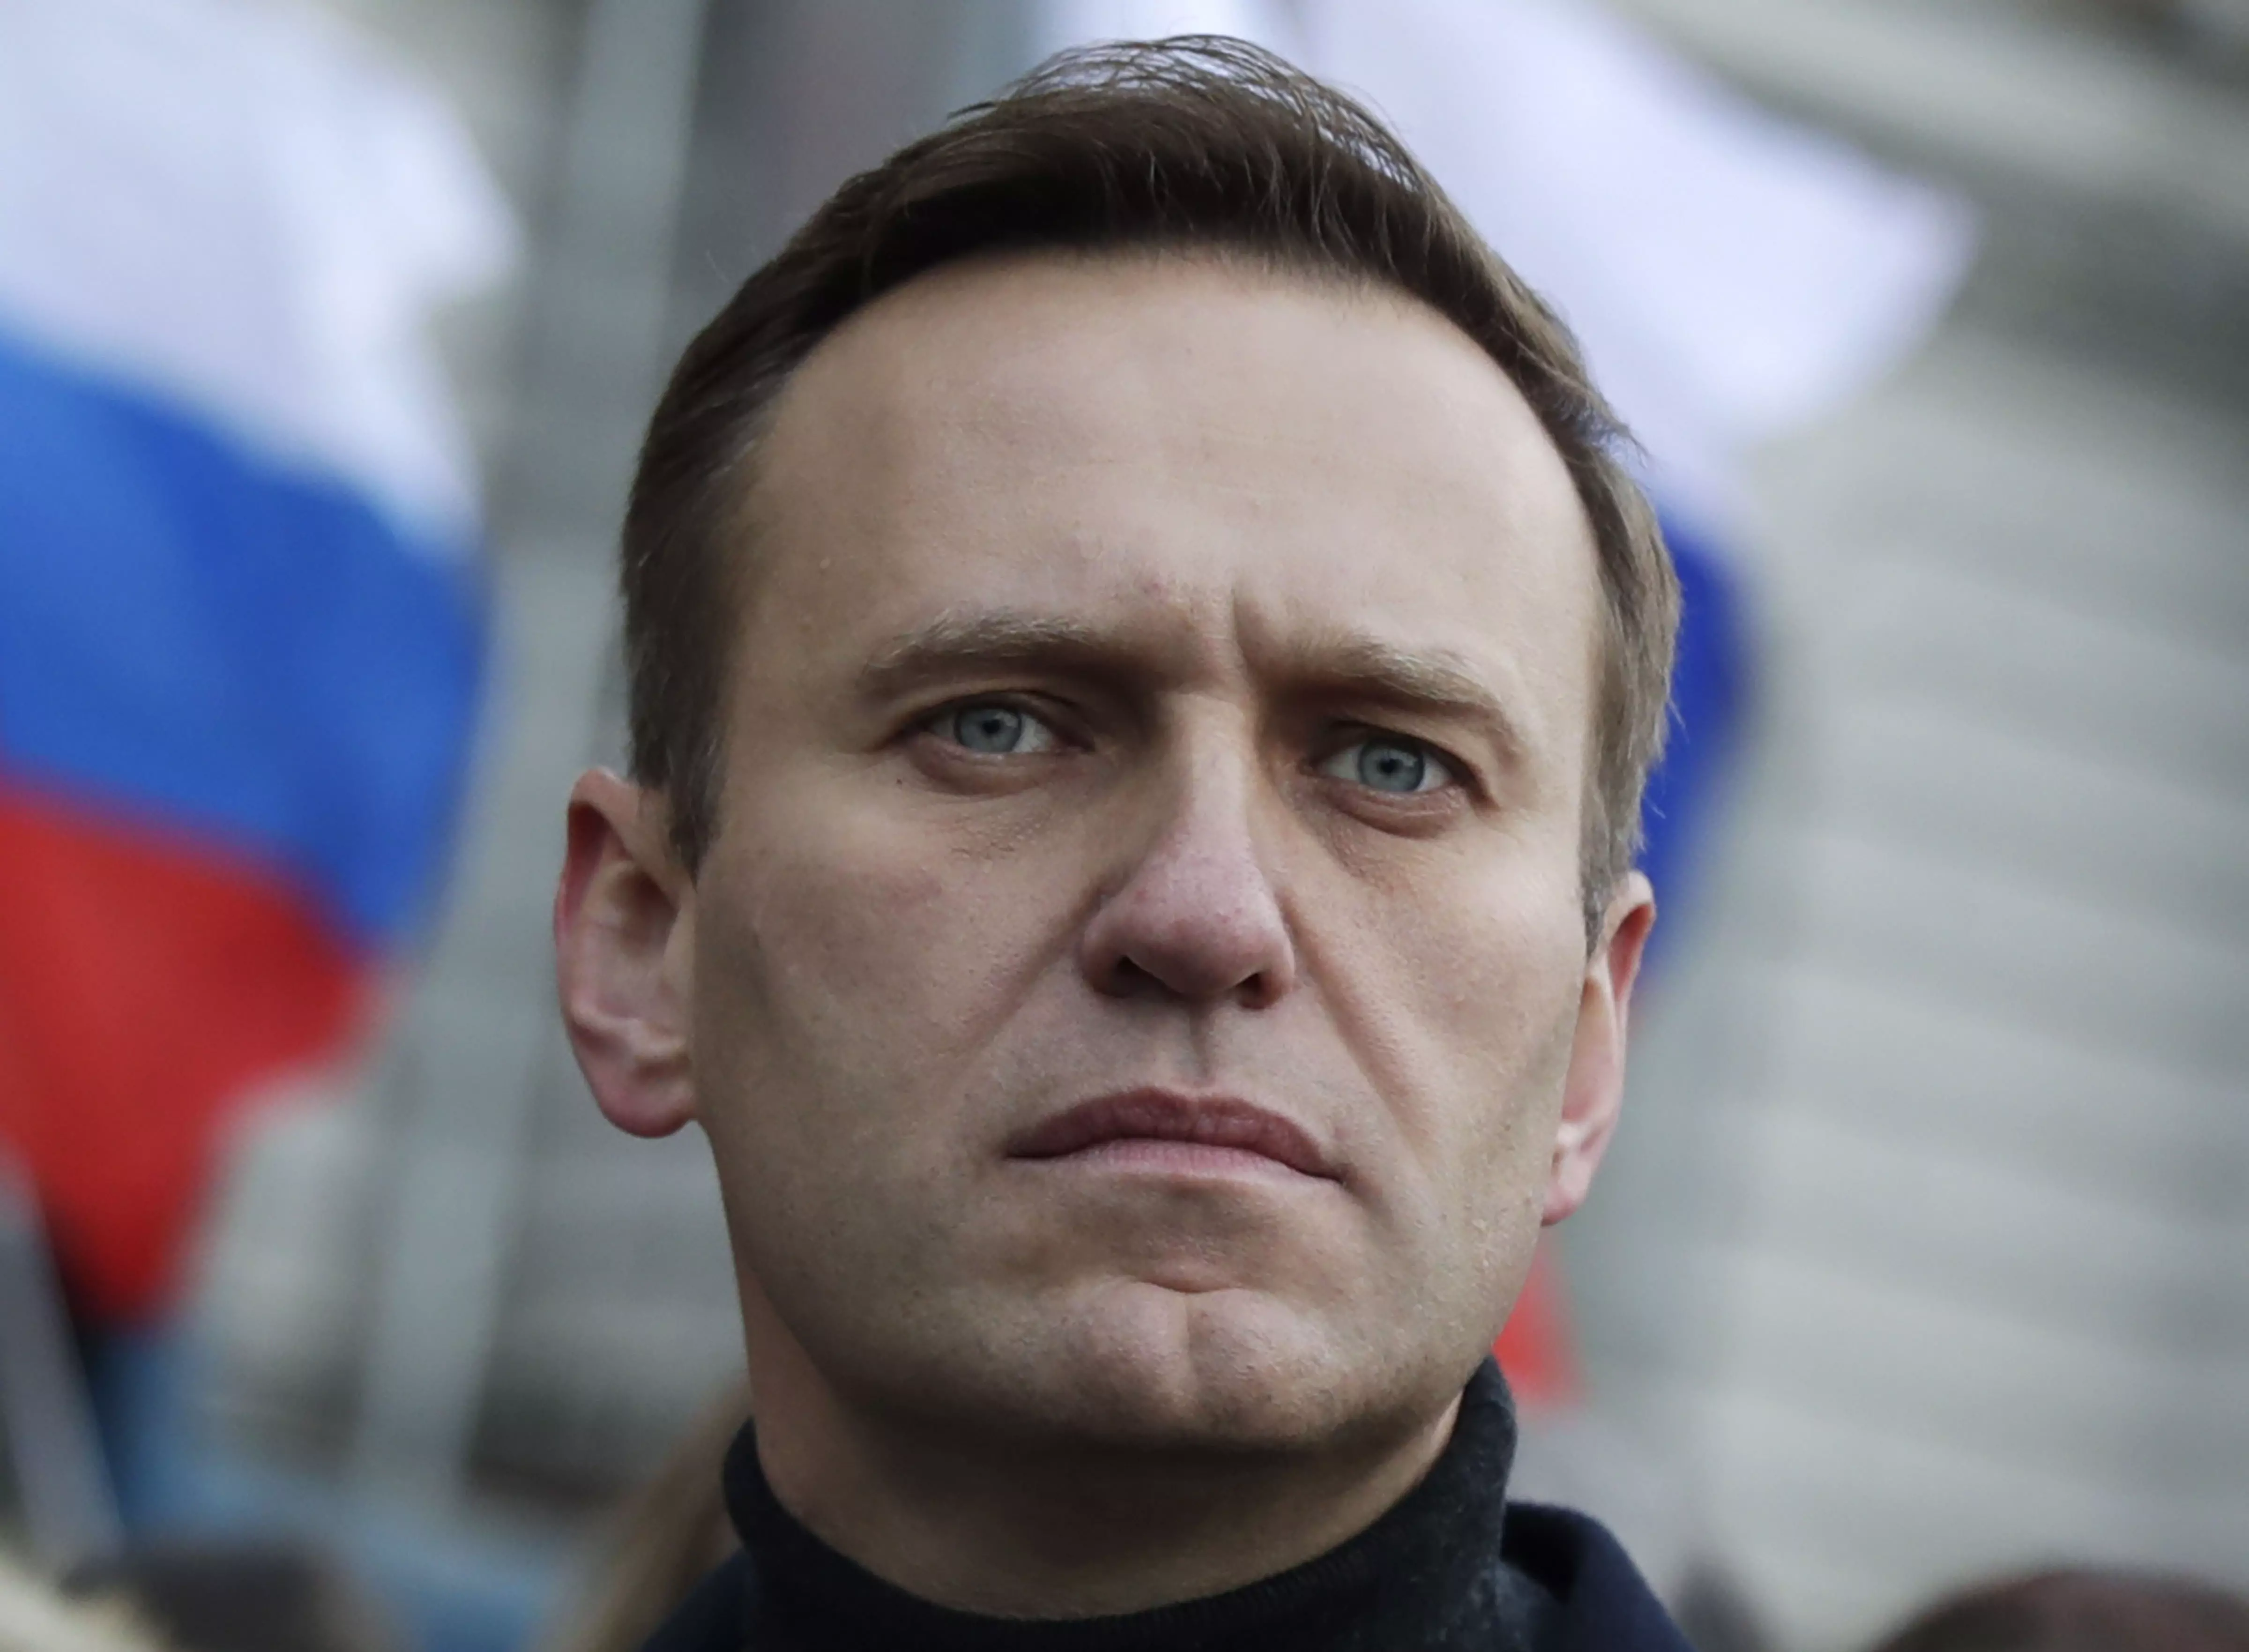 Alexei Navalny’s body handed over to mother, says aide